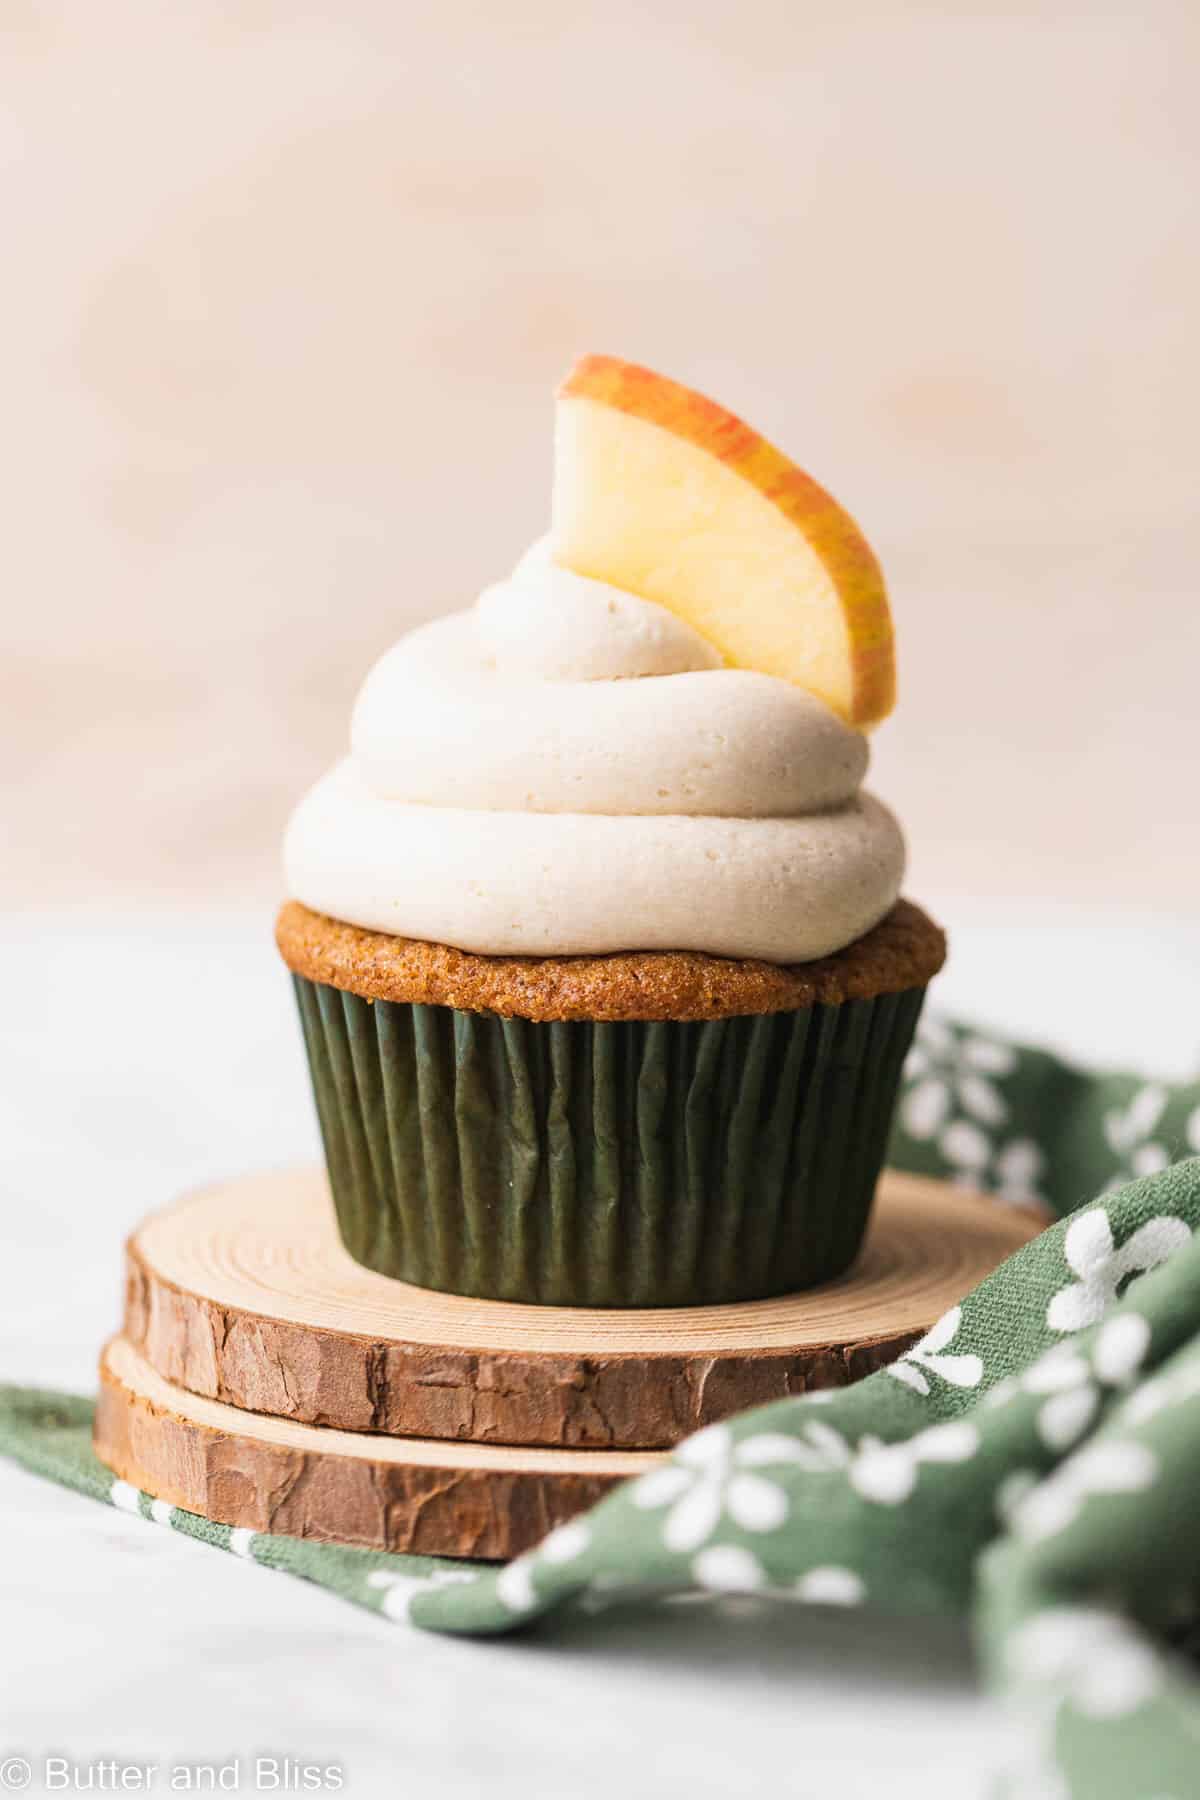 A single gluten free apple cupcake with frosting on a small wood coaster.